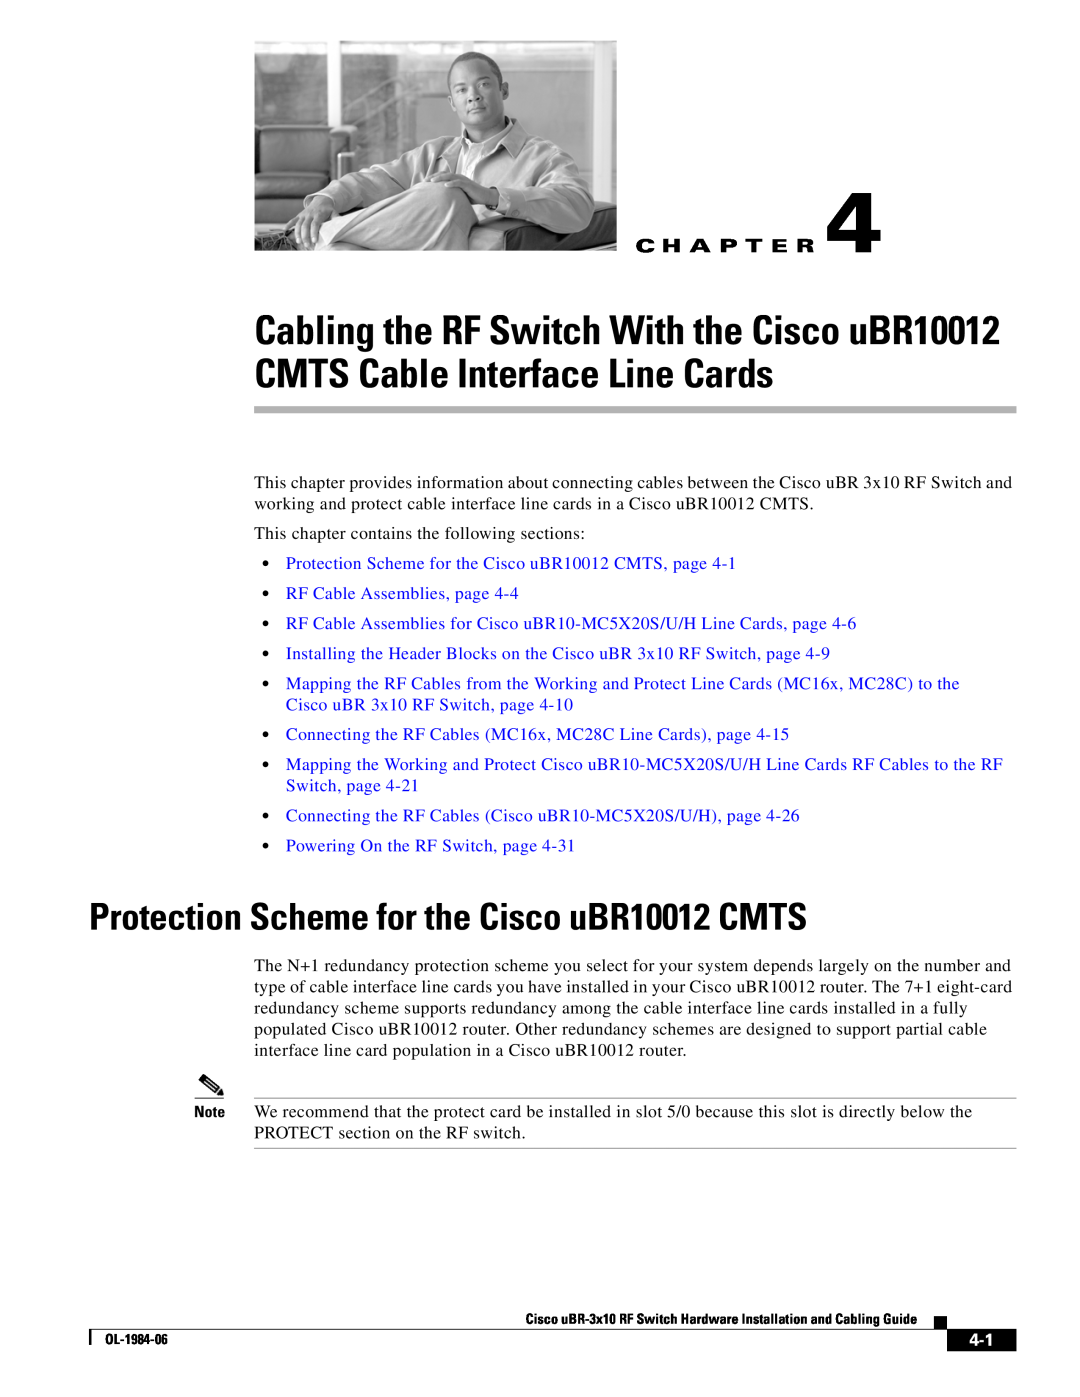 Cisco Systems UBR-3X10 Protection Scheme for the Cisco uBR10012 CMTS, page, RF Cable Assemblies, page, C H A P T E R 